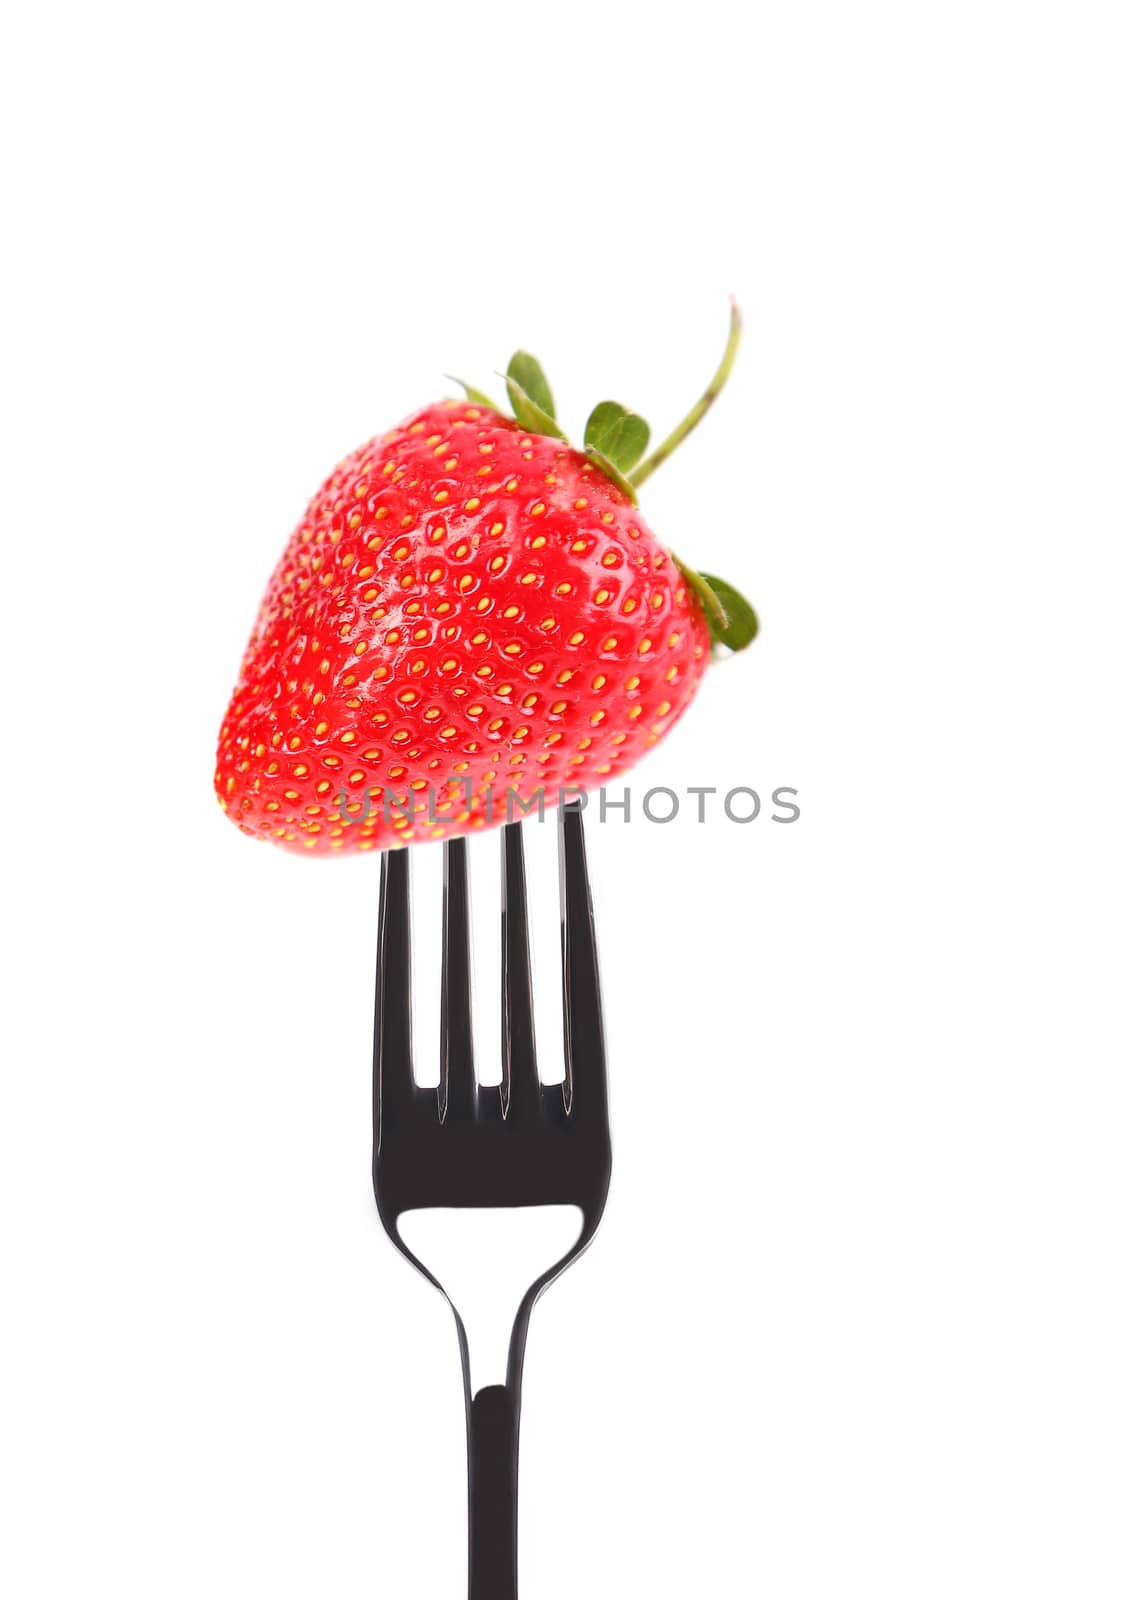 Strawberry on a fork. Isolated on a white background.